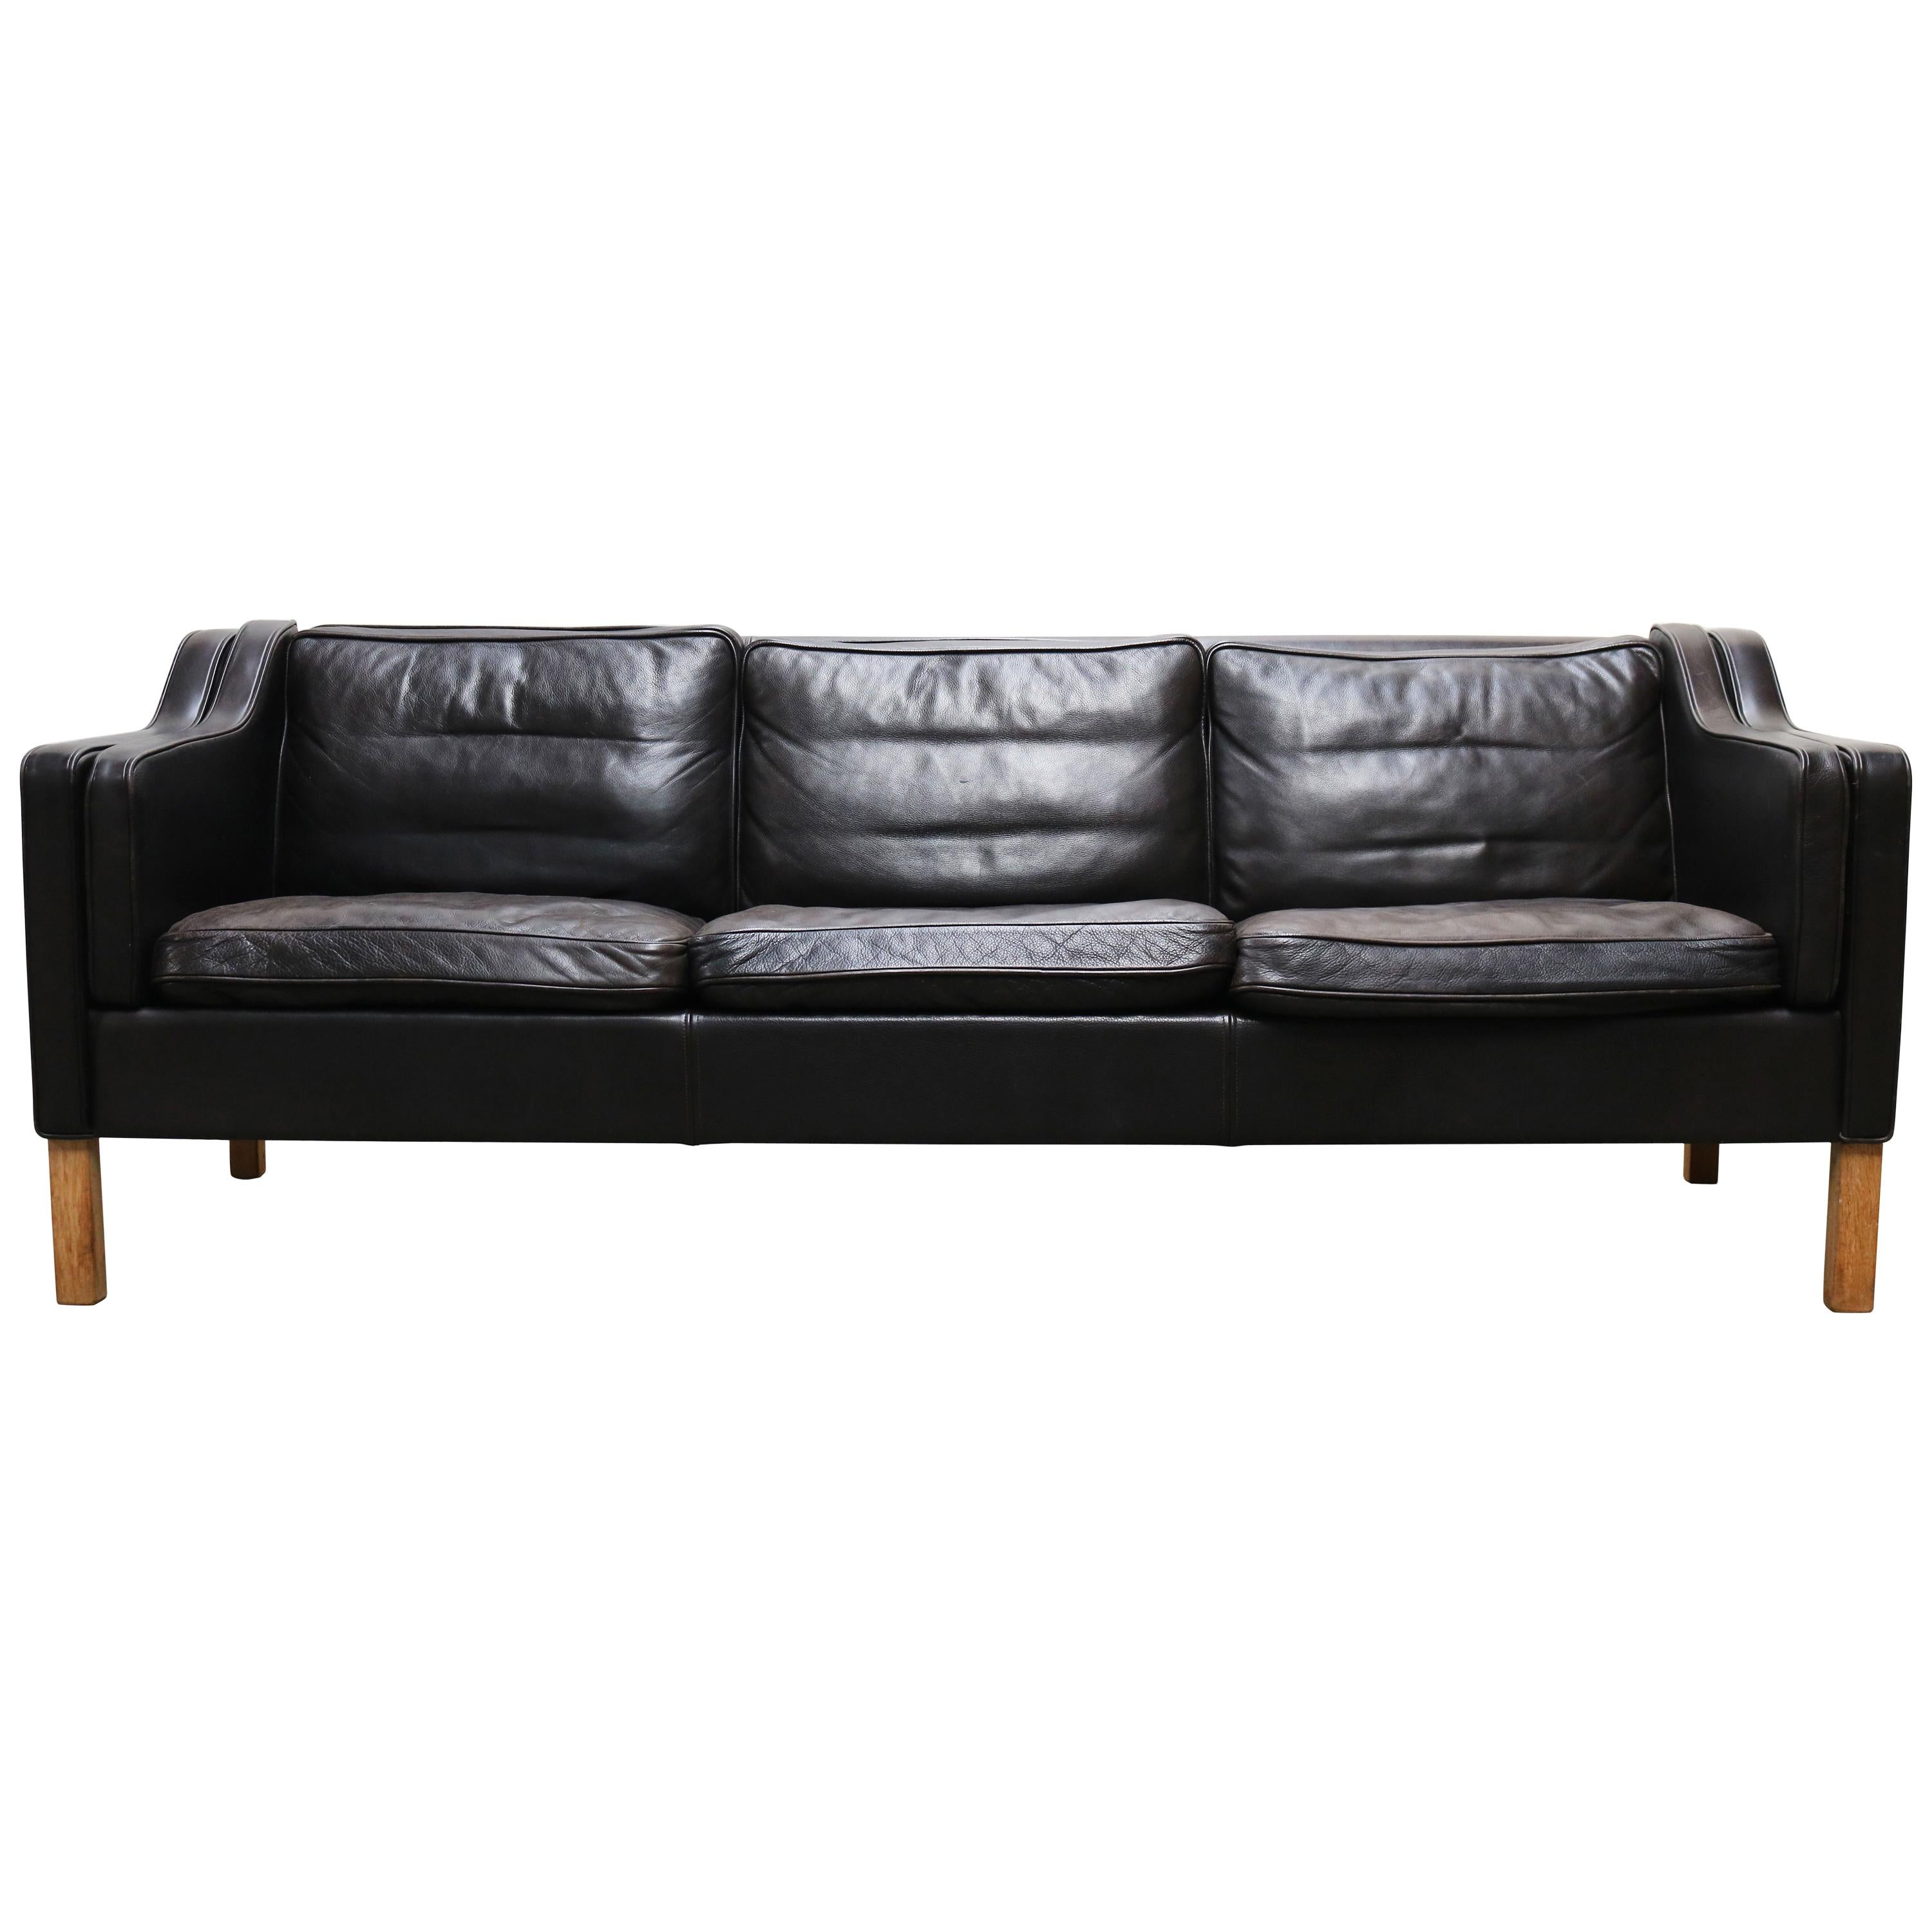 Vintage Black Leather Sofa 2213 by Børge Mogensen for Fredericia 1960 Three-Seat